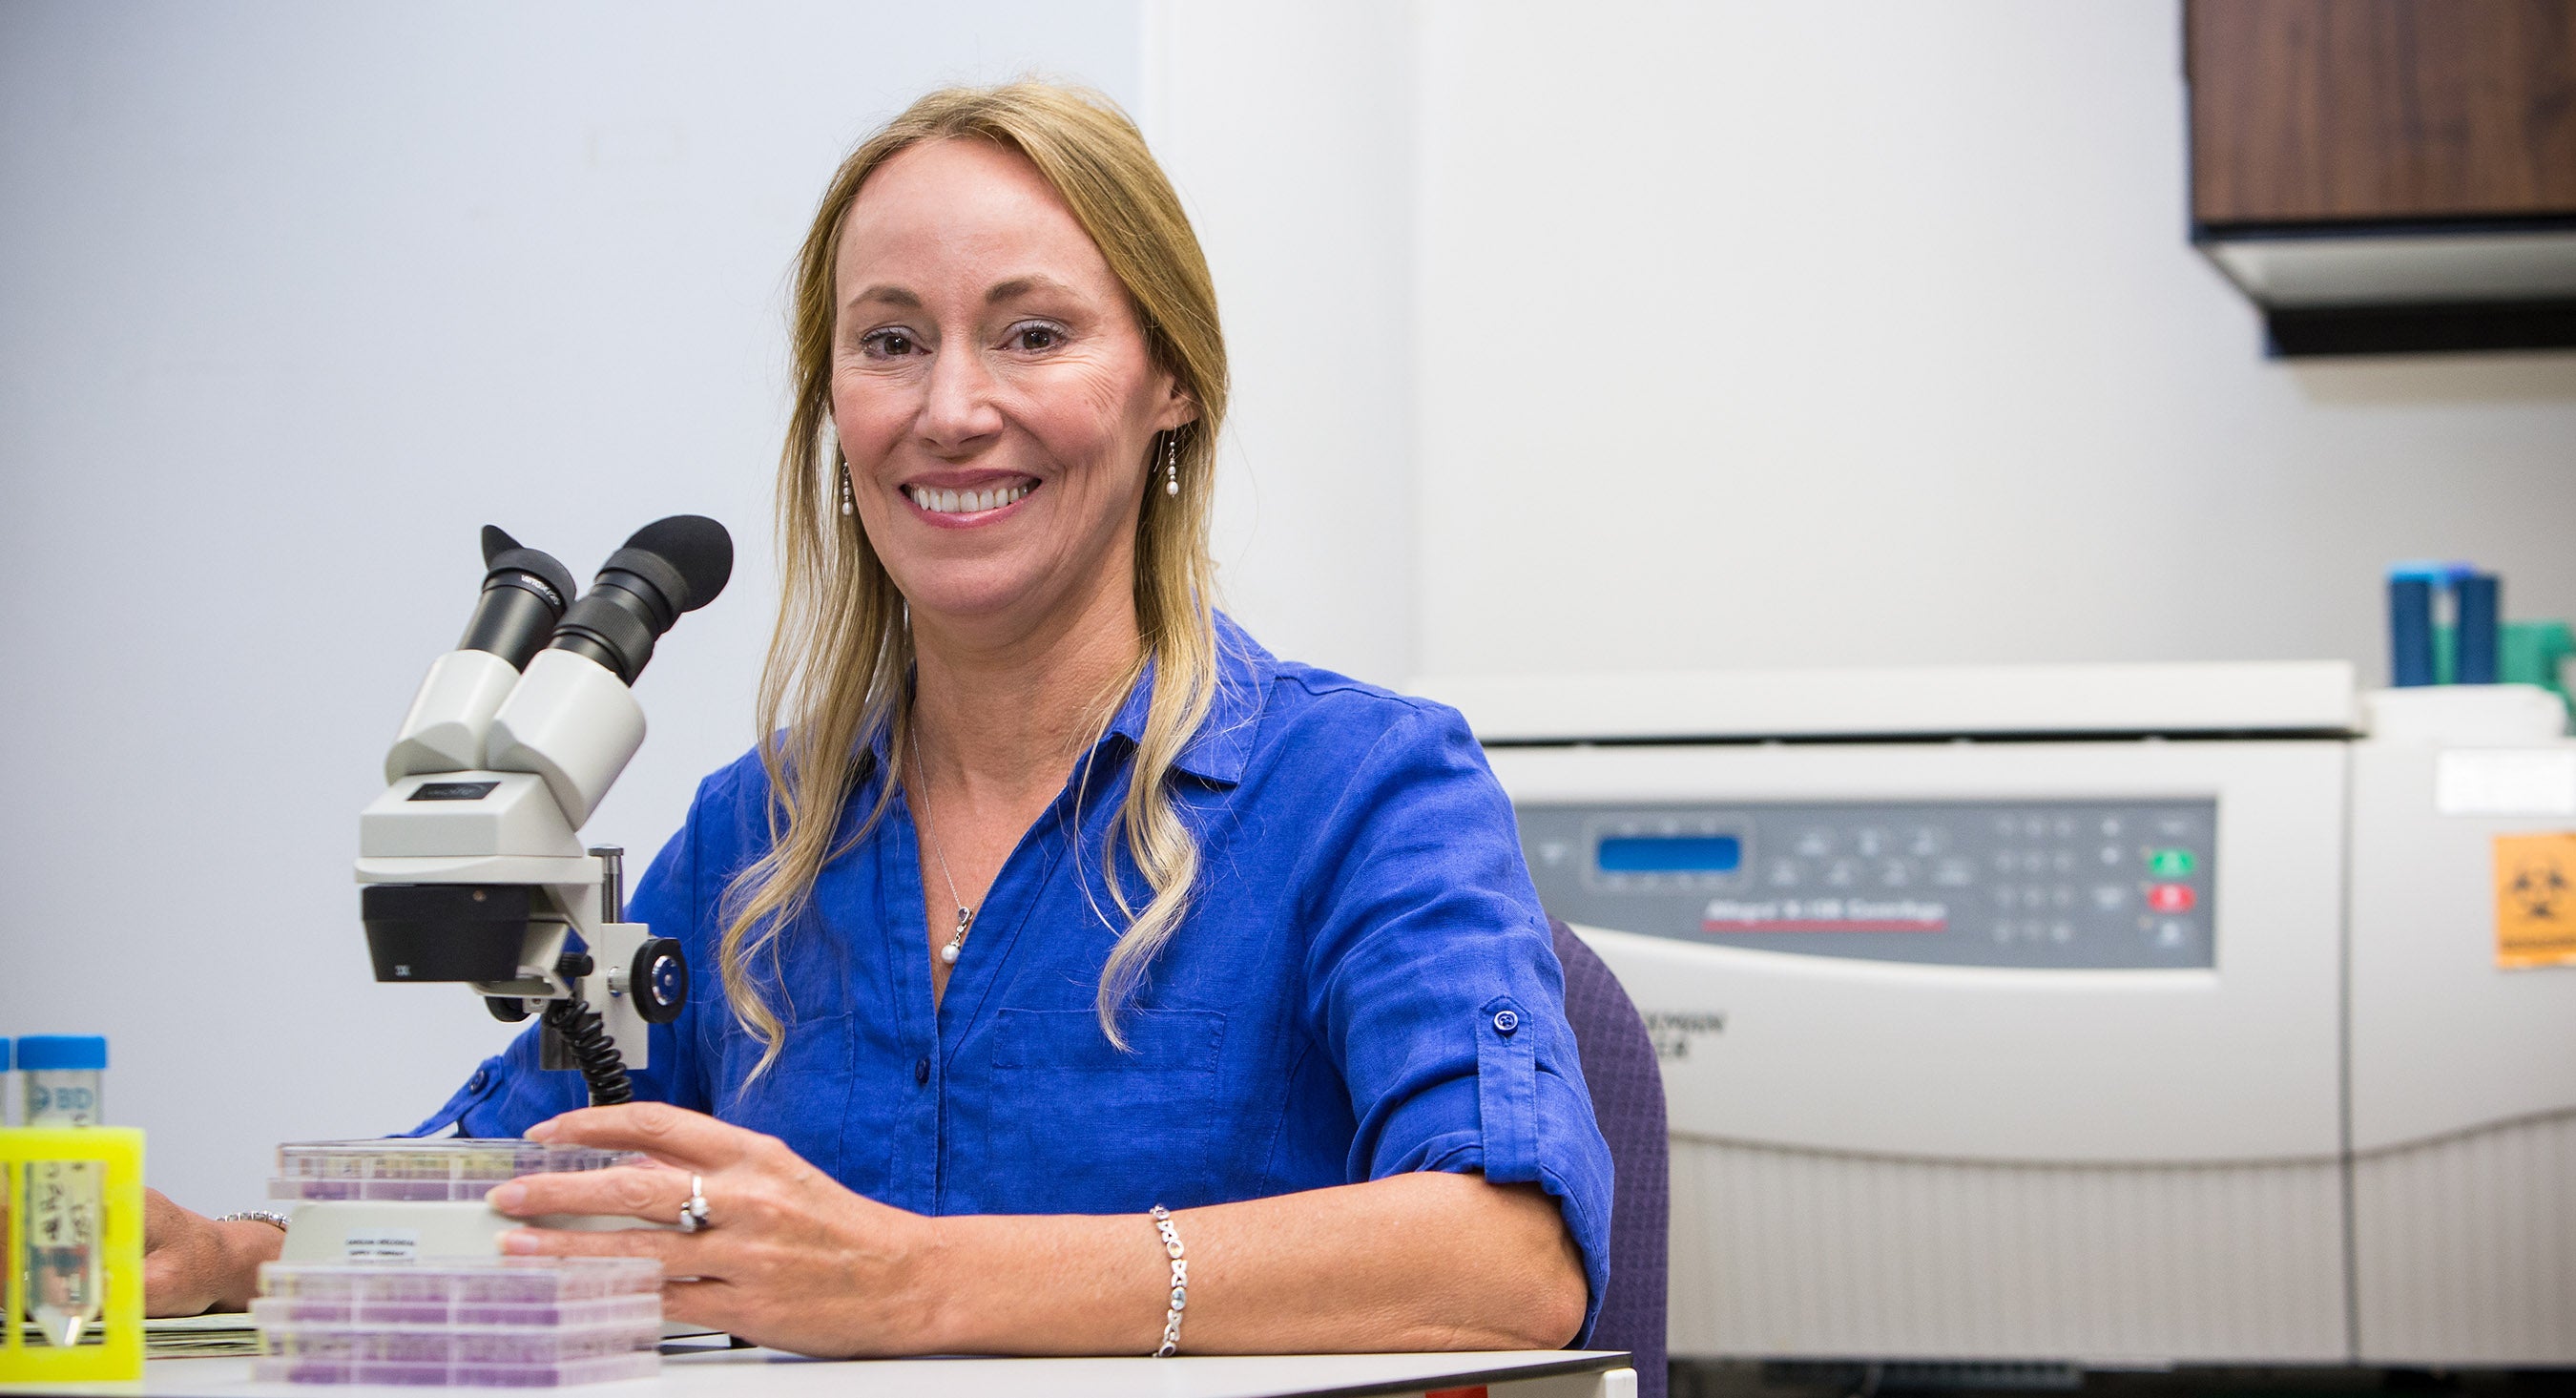 Dr. Rachel Roper was part of the team that first isolated, sequenced and analyzed the genome for SARS, a coronavirus, during an outbreak in 2003.